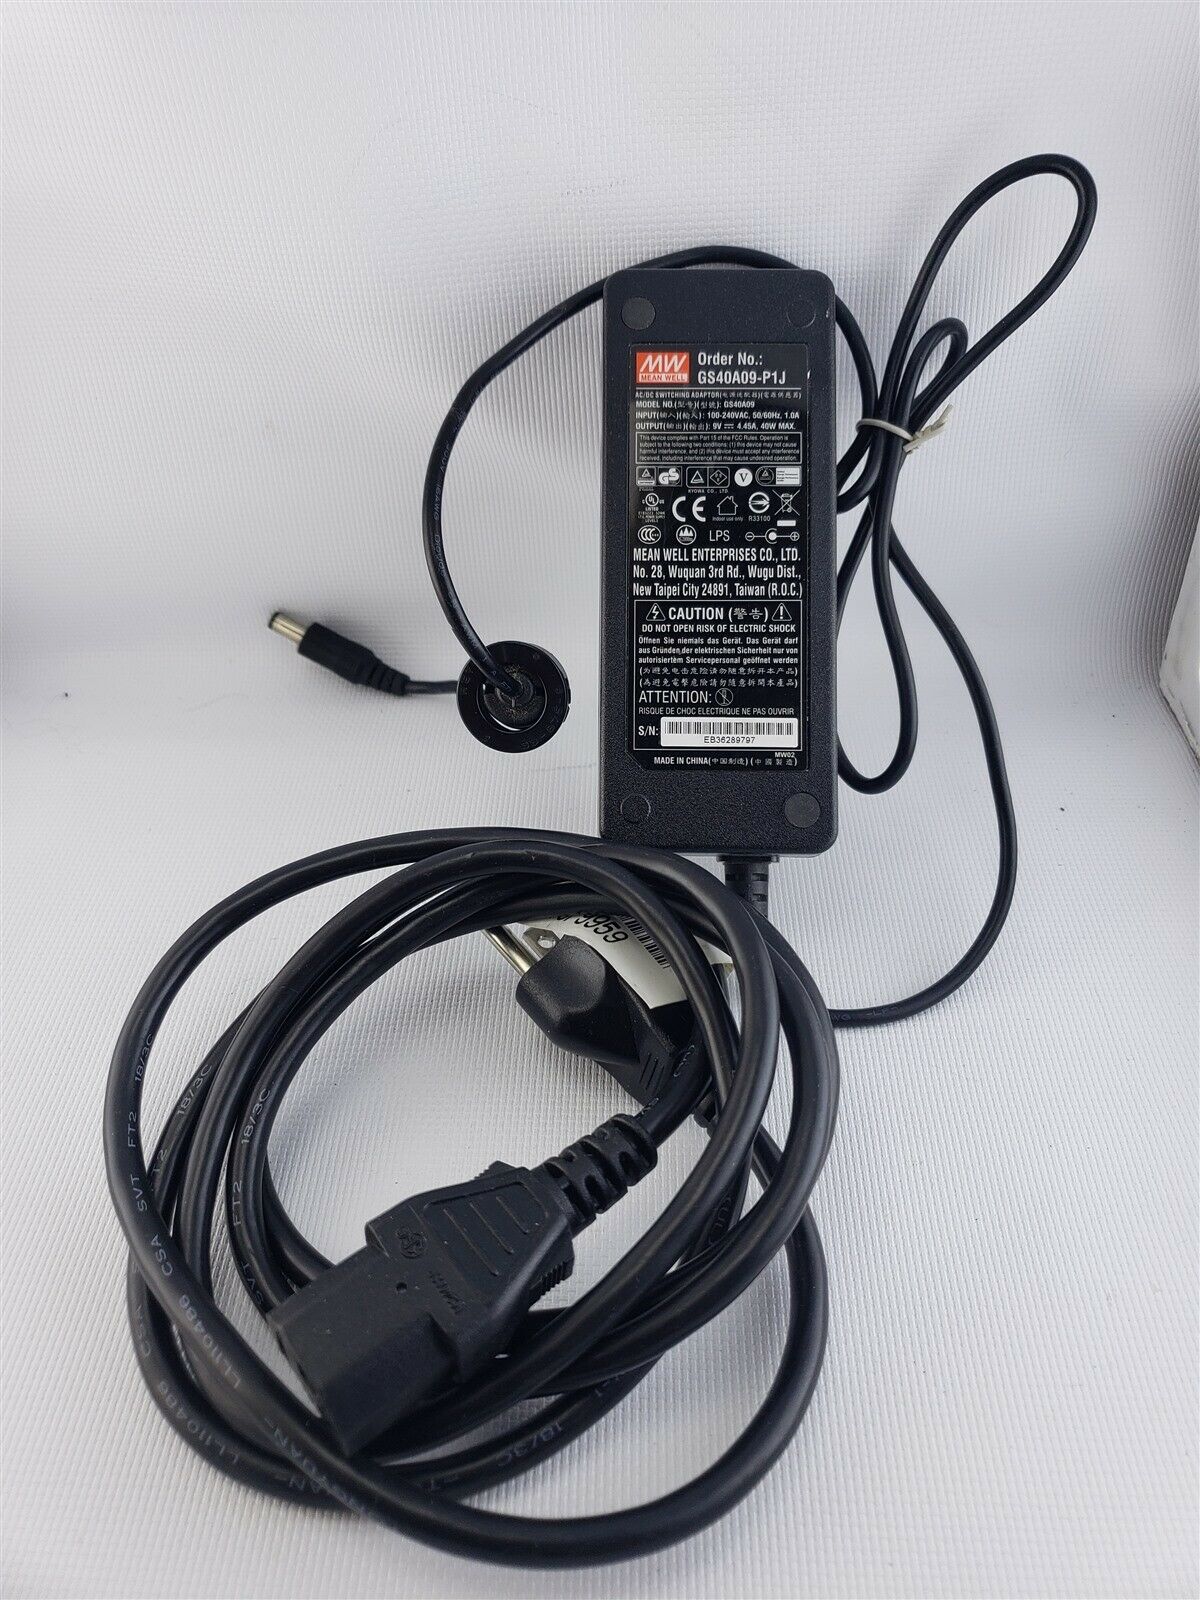 *Brand NEW* Original OEM 12V 4A AC Adapter&Cord for MSI Optix MAG27C LED Gaming Monitor@ Country/Region of Man